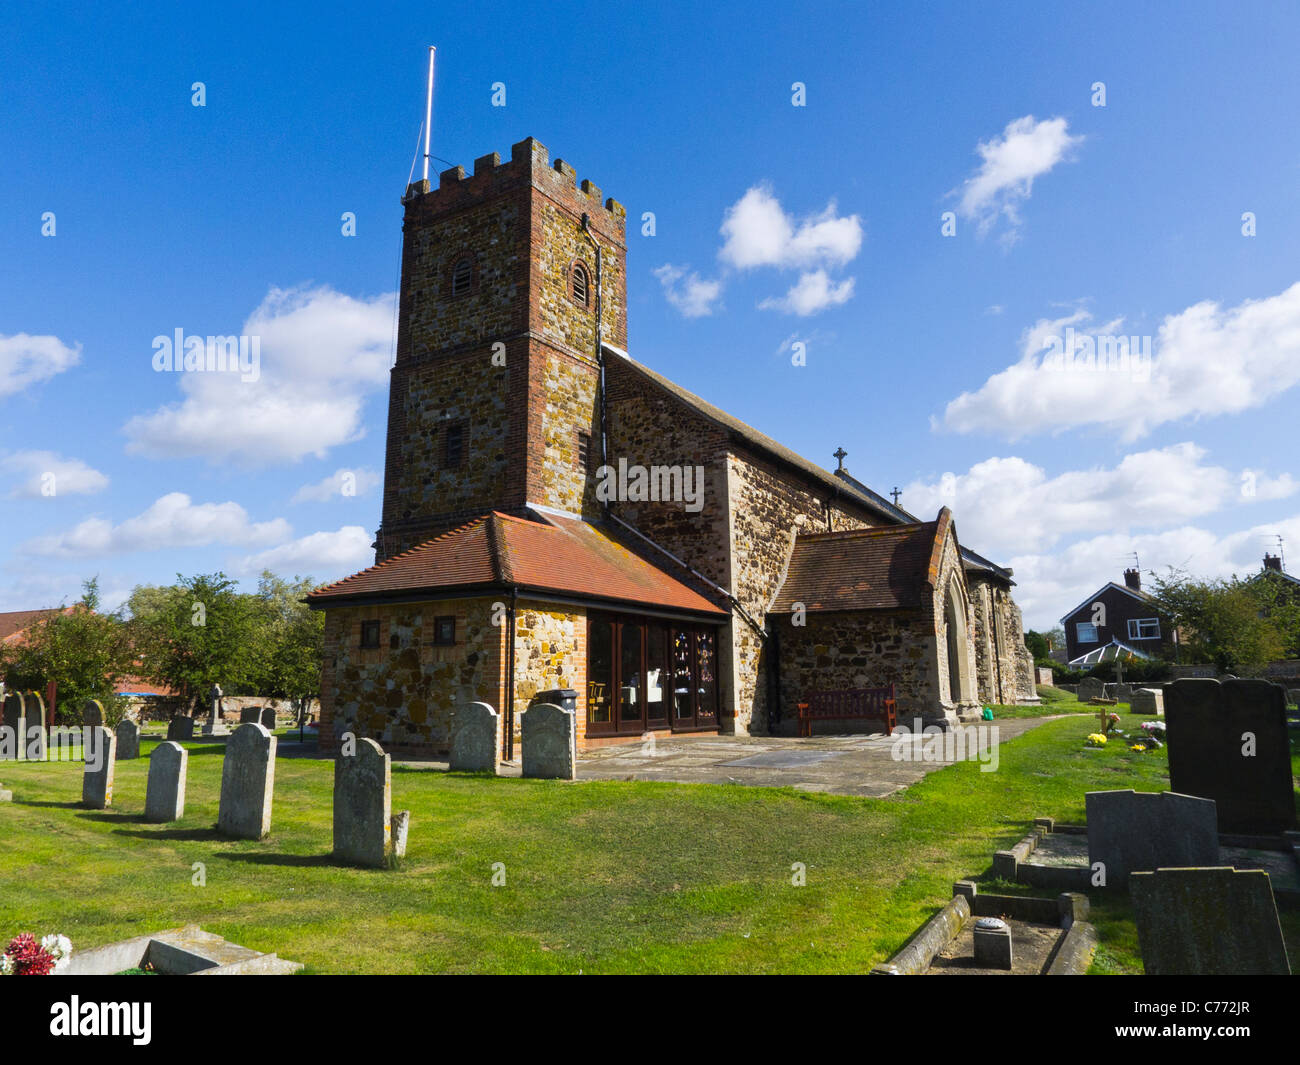 The church of St Mary the virgin at South Wootton near King's Lynn in Norfolk. Stock Photo